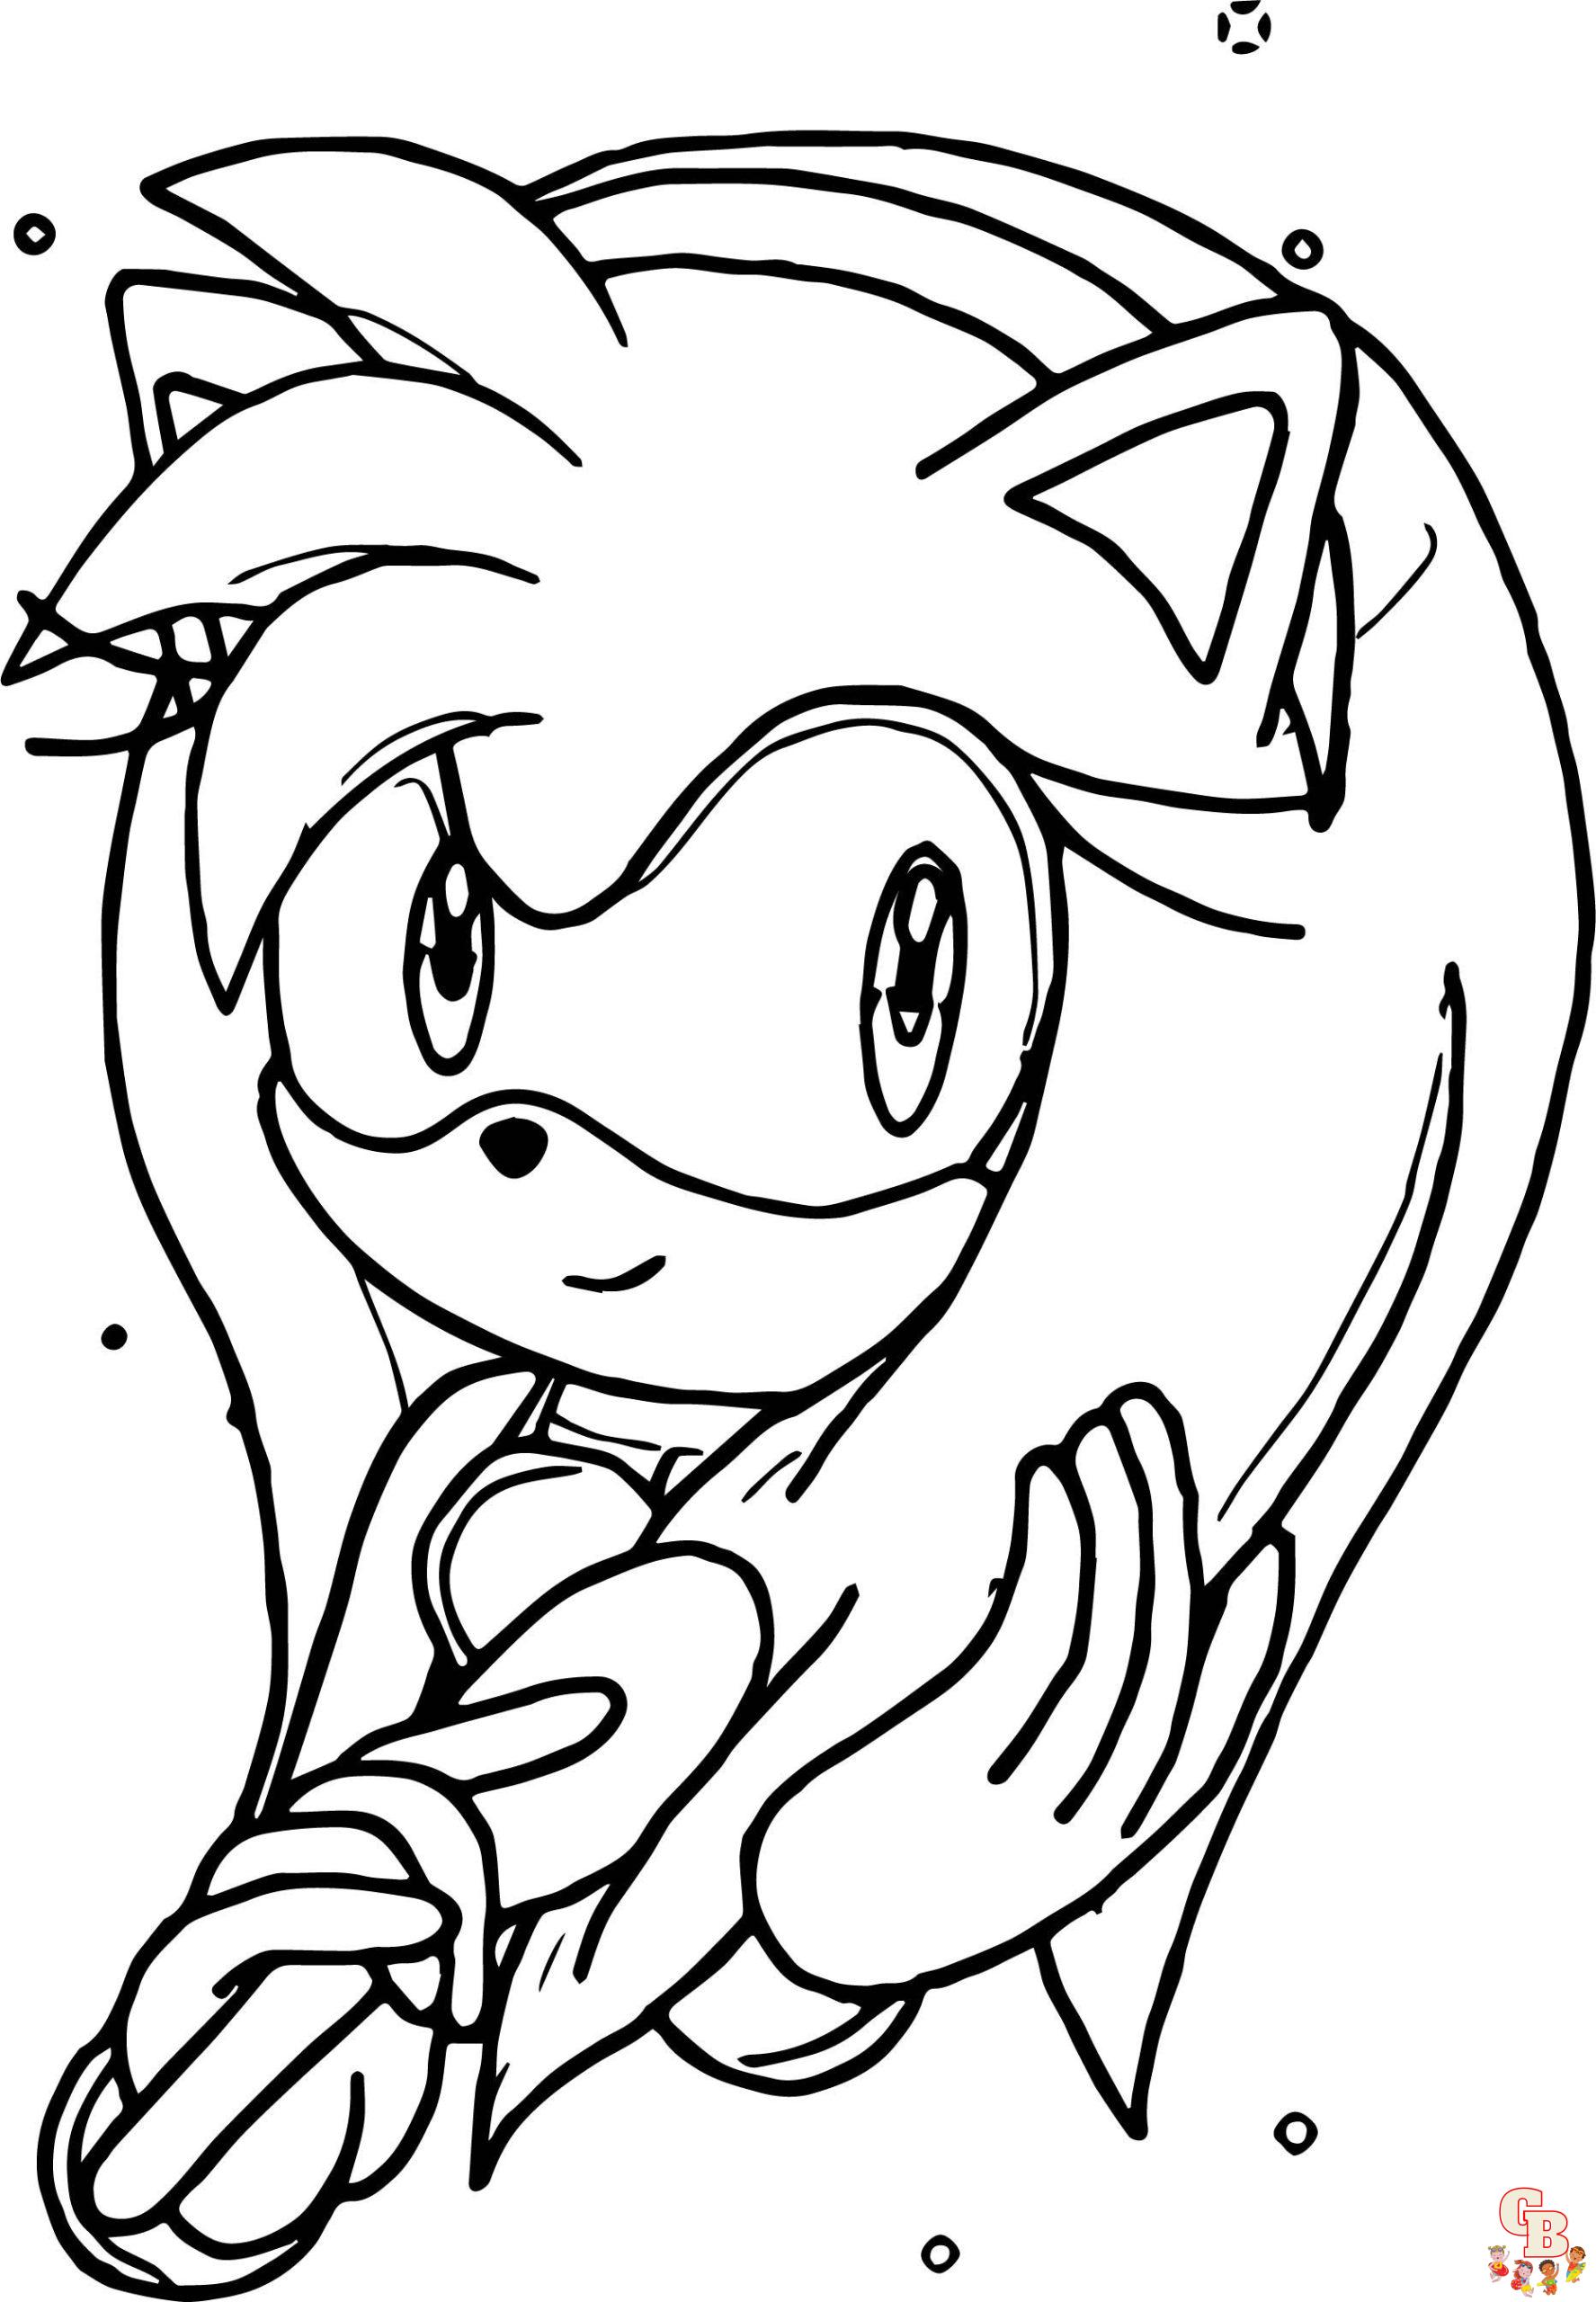 Sonic 3 And Amy Rose, Page 5